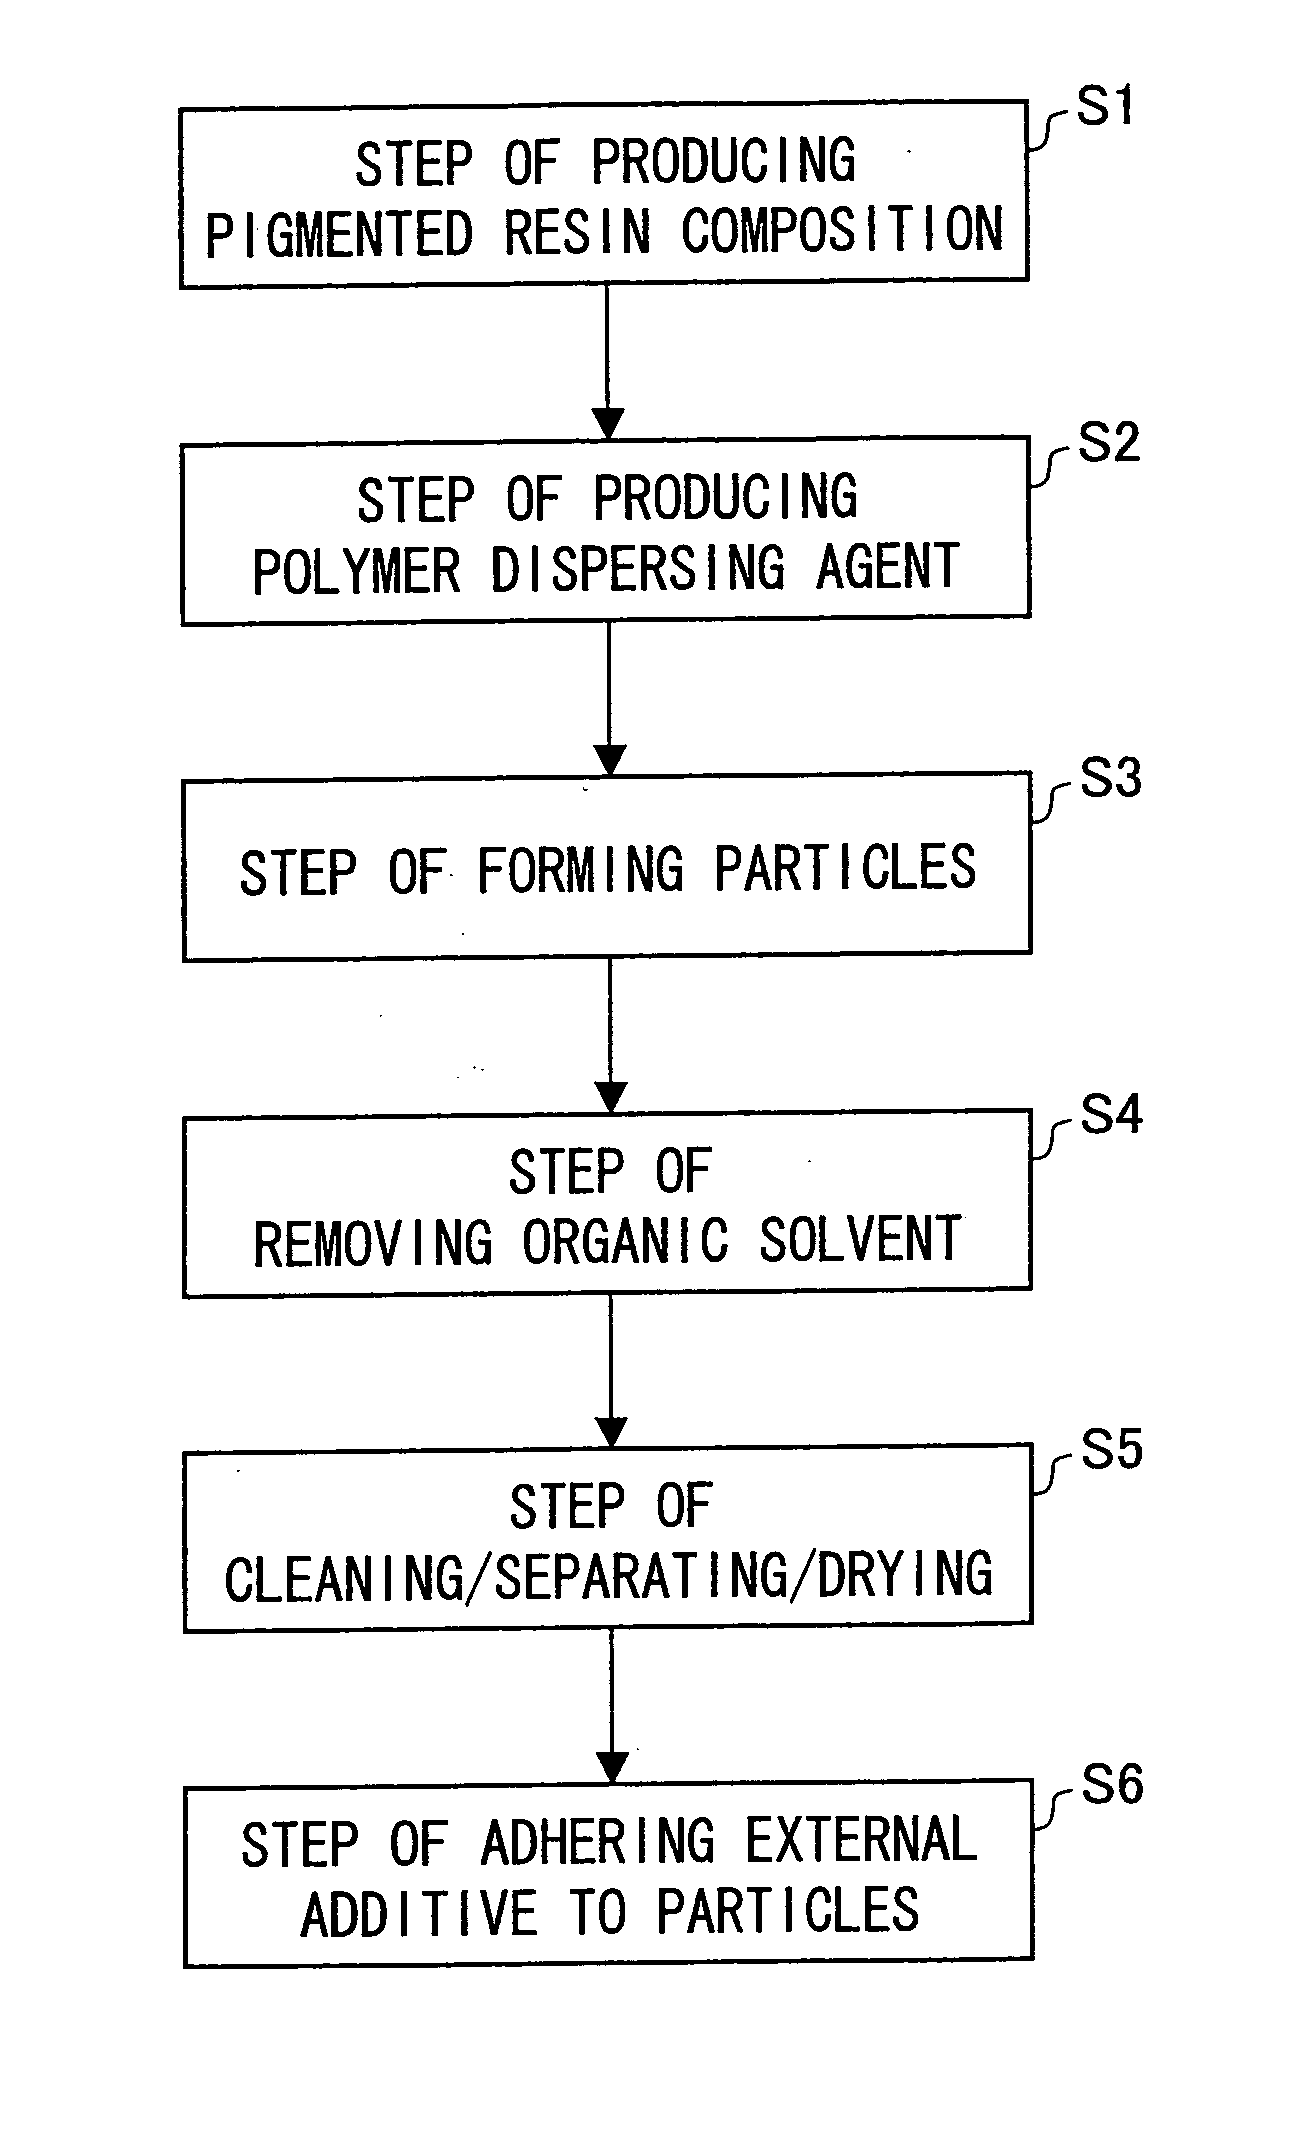 Toner for development and method of producing toner